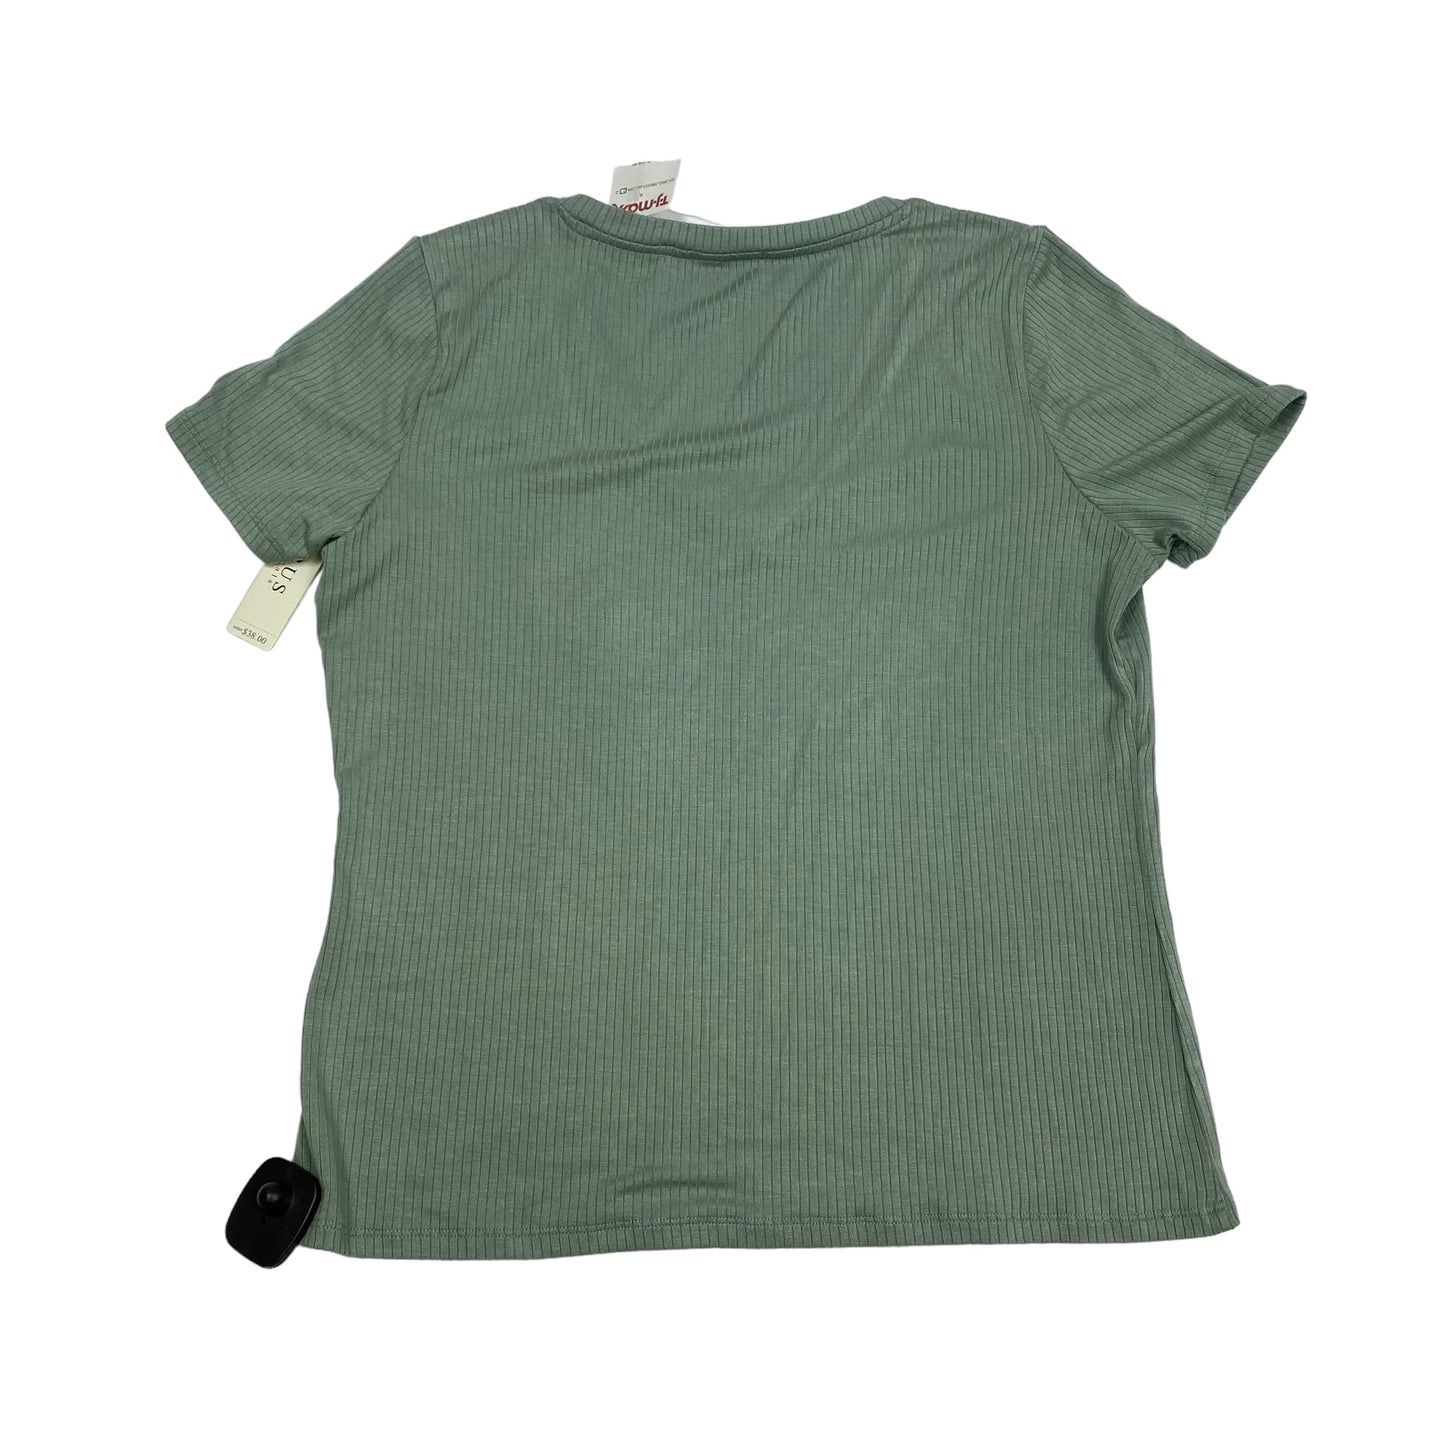 Green Top Short Sleeve Cyrus Knits, Size L